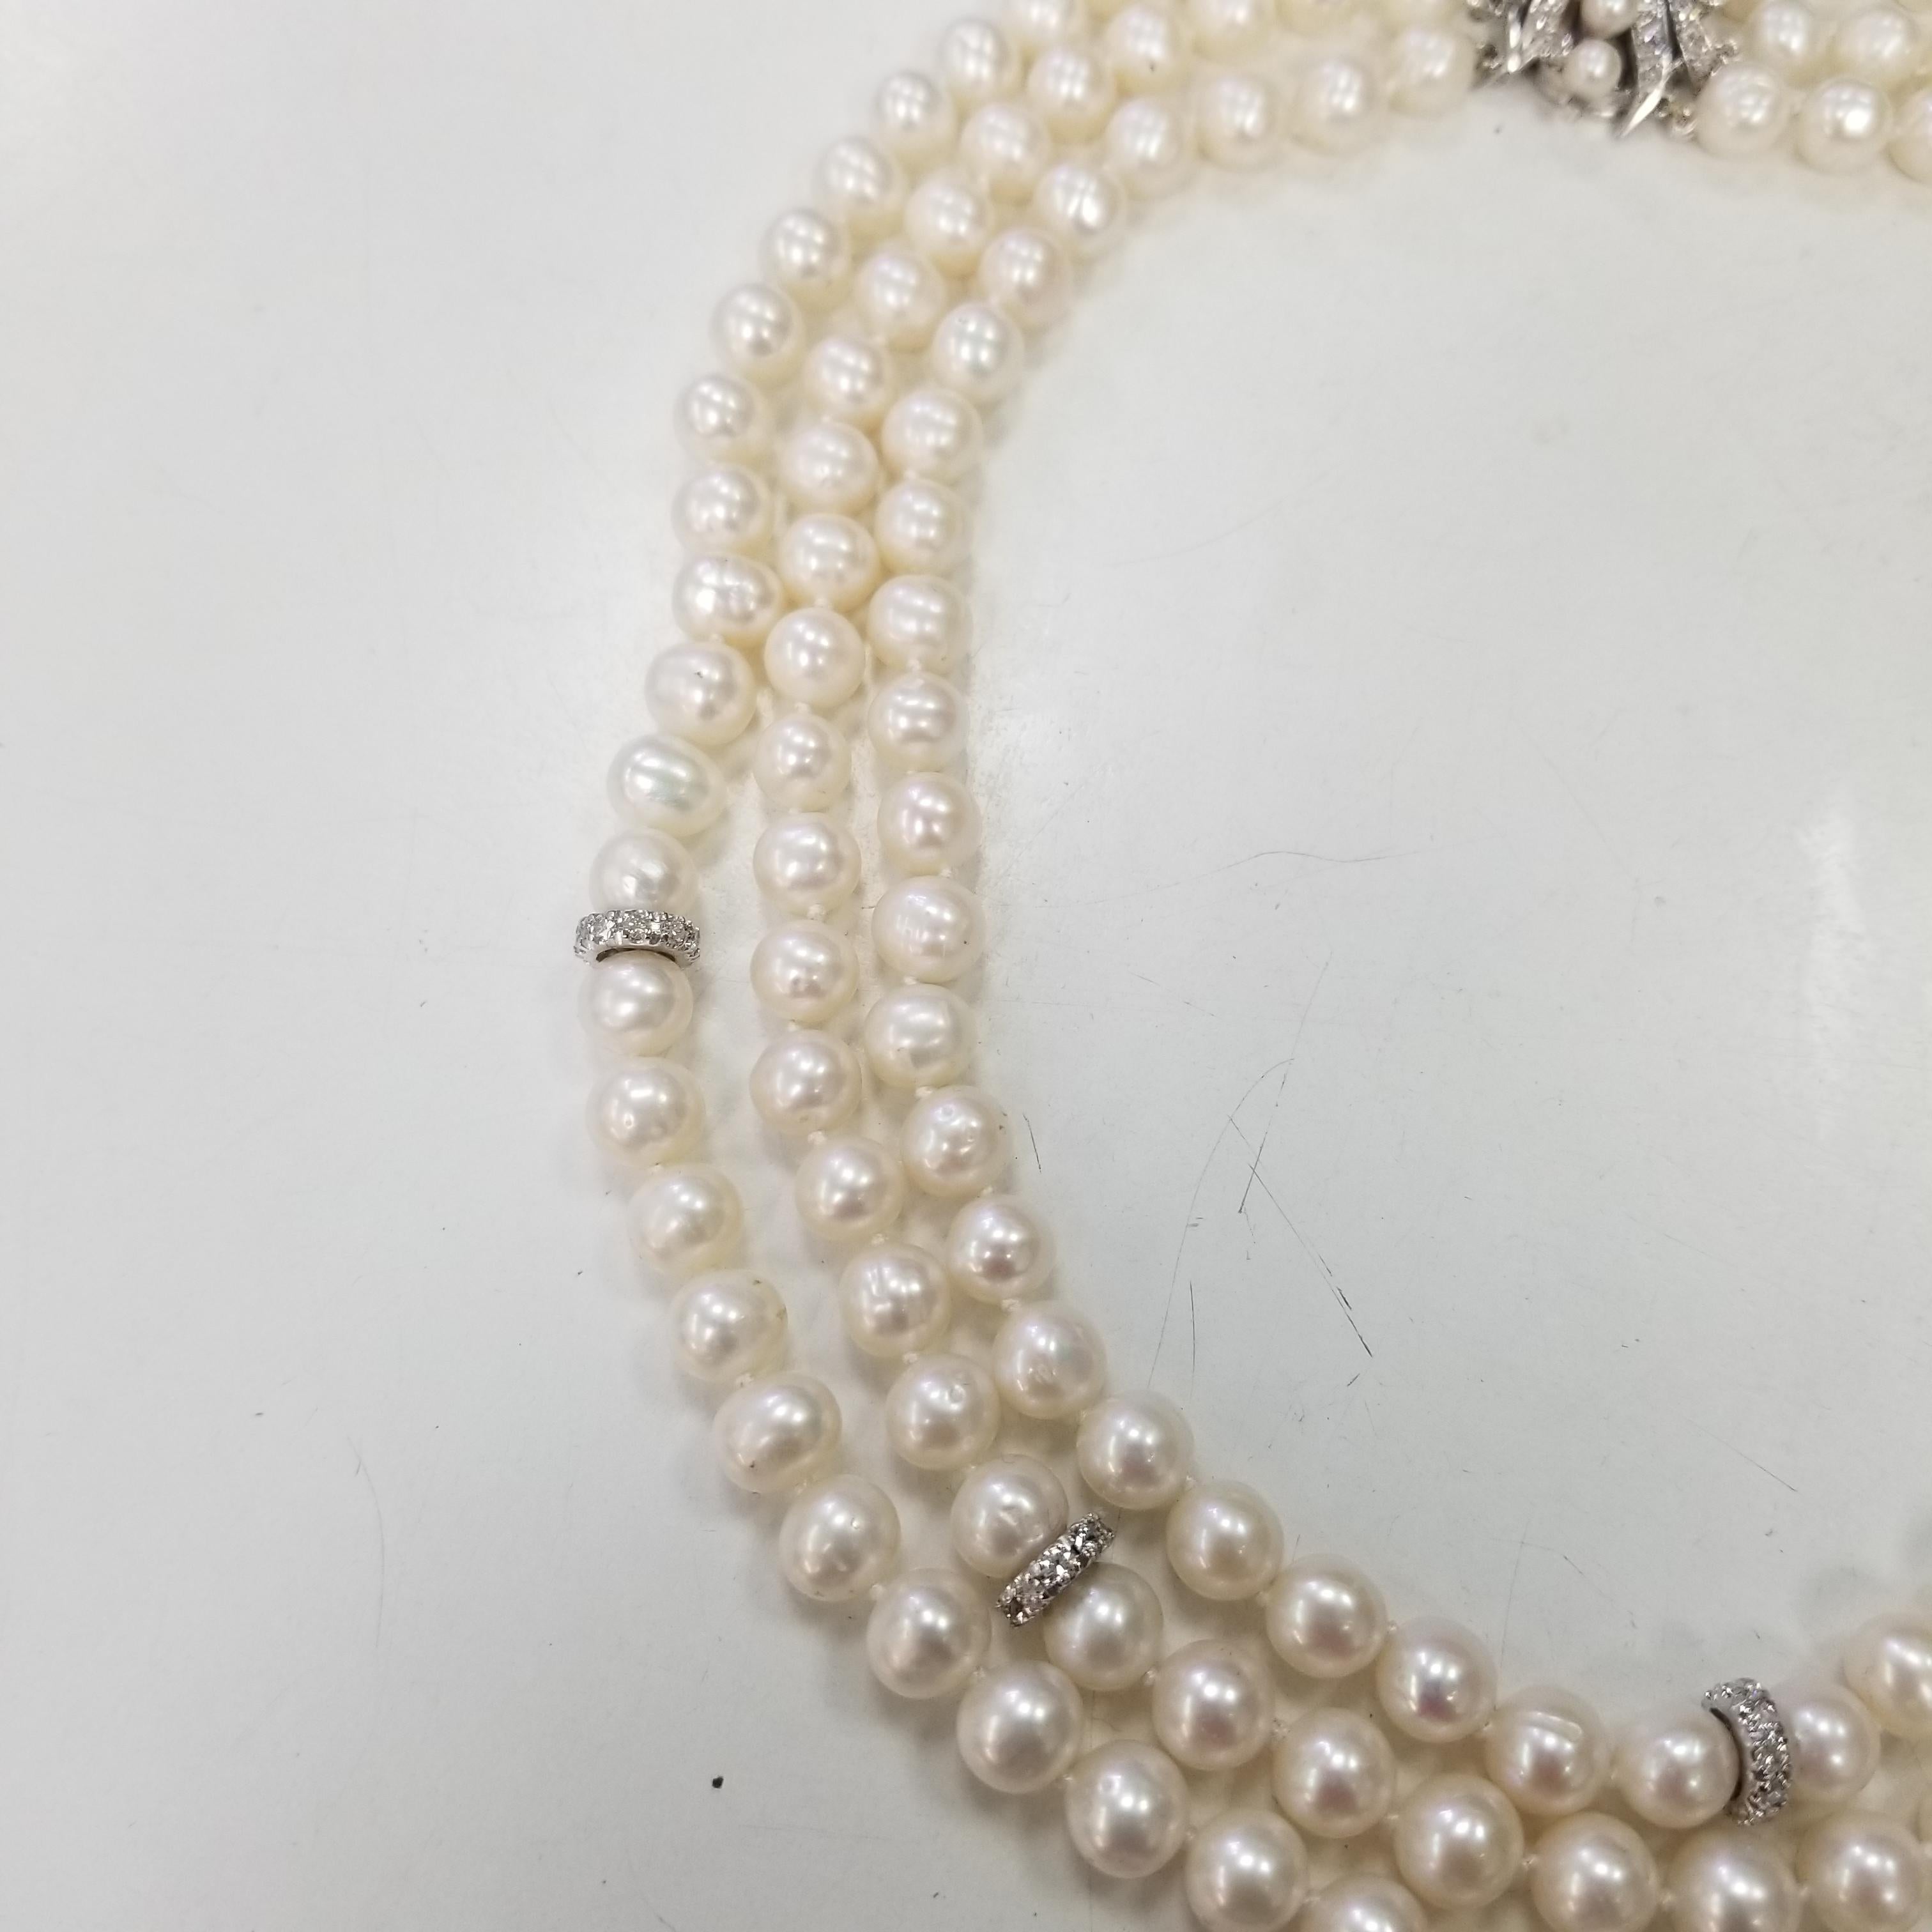 3 strands of pearls